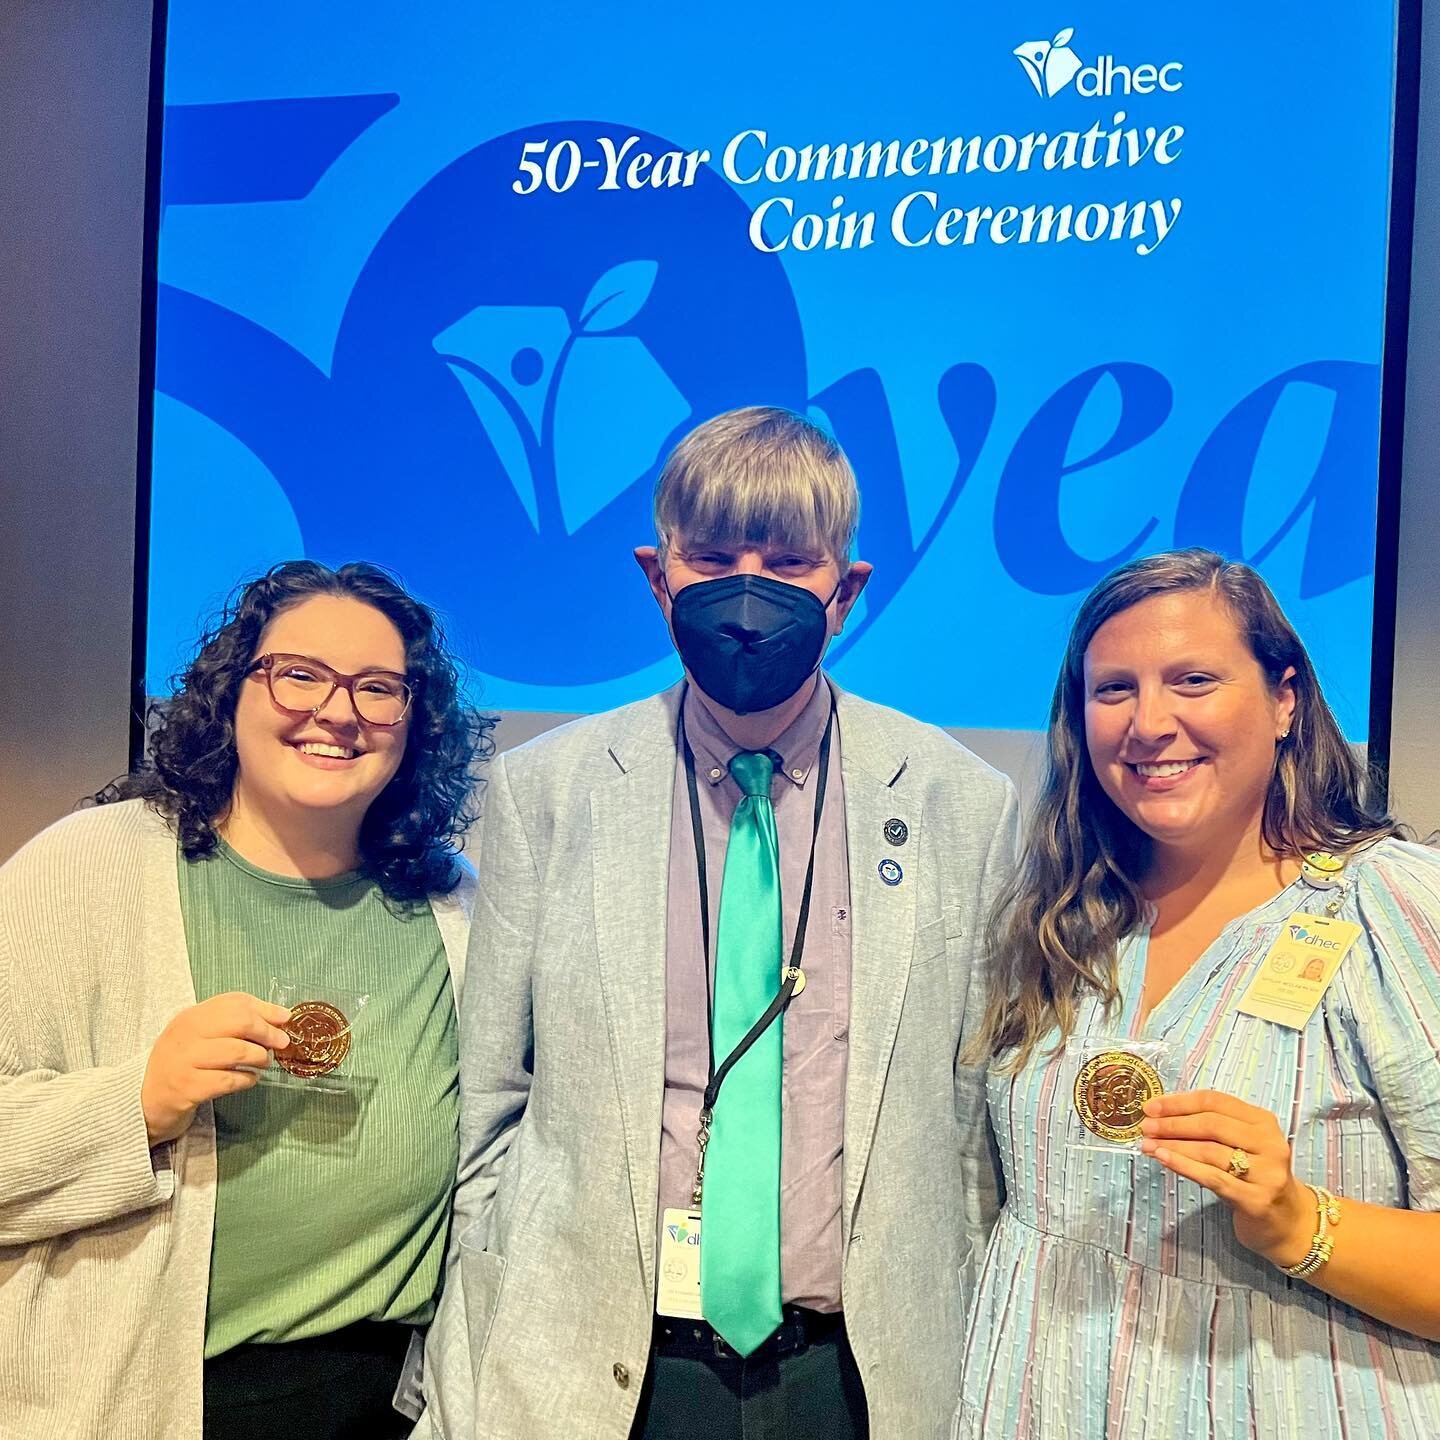 Yesterday I had the honor of being recognized for doing work that I love 🥹 I received a 50 year commemorative coin from Dr Simmer at my day job with SC DHEC for my outreach work with students. As they say at the Oscar&rsquo;s, it was just an honor t